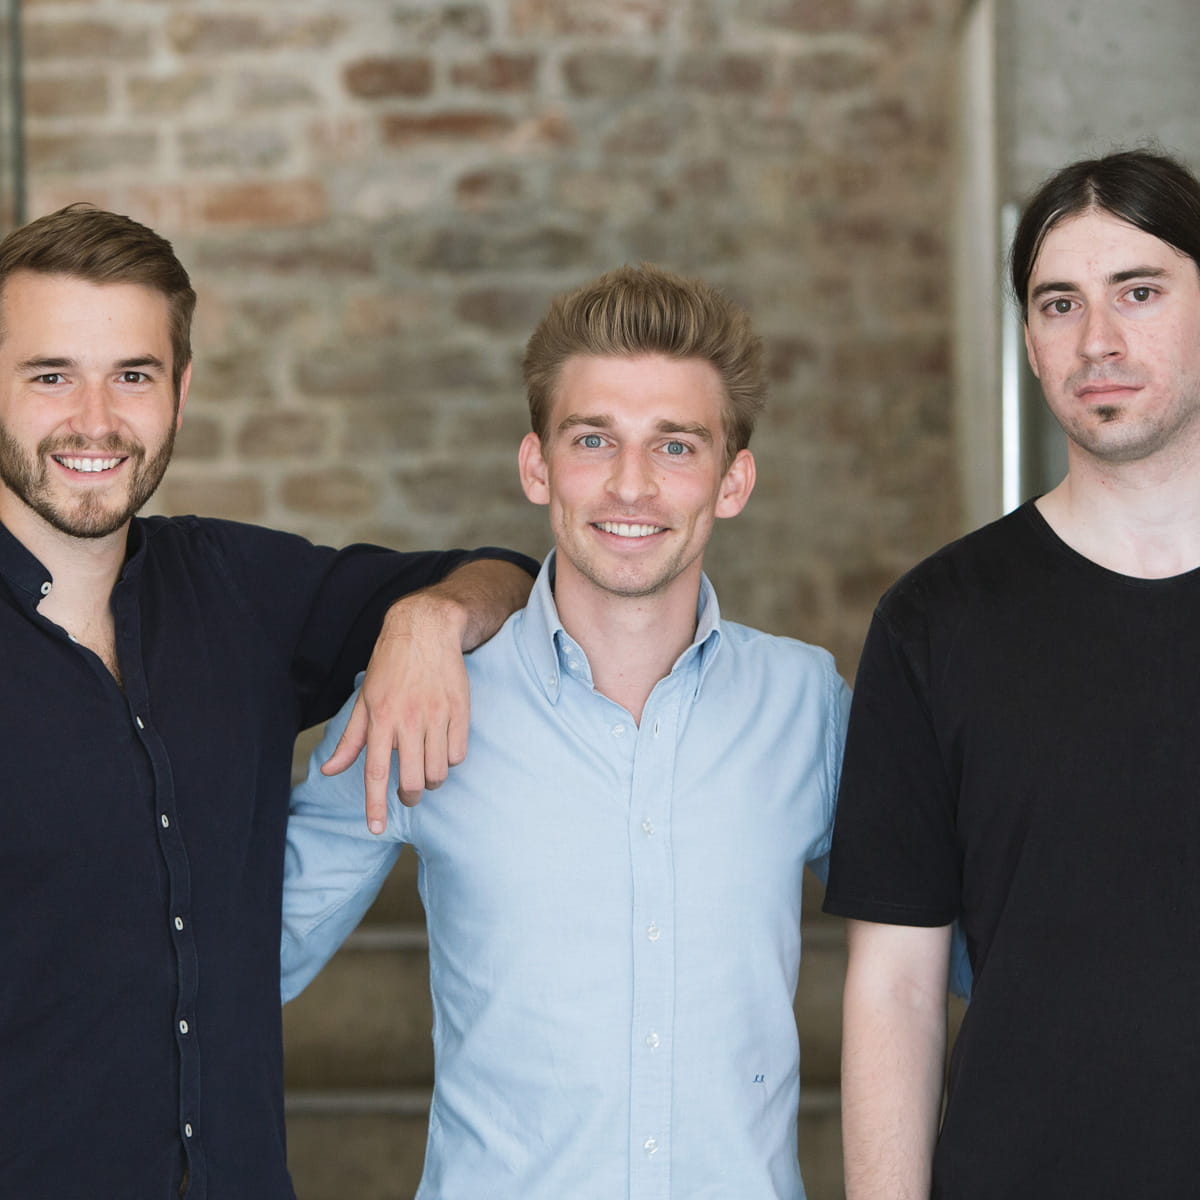 Medium close-up of the start-up Refurbed’s three founders. Refurbed runs a sustainable online marketplace for refurbished electronic equipment.